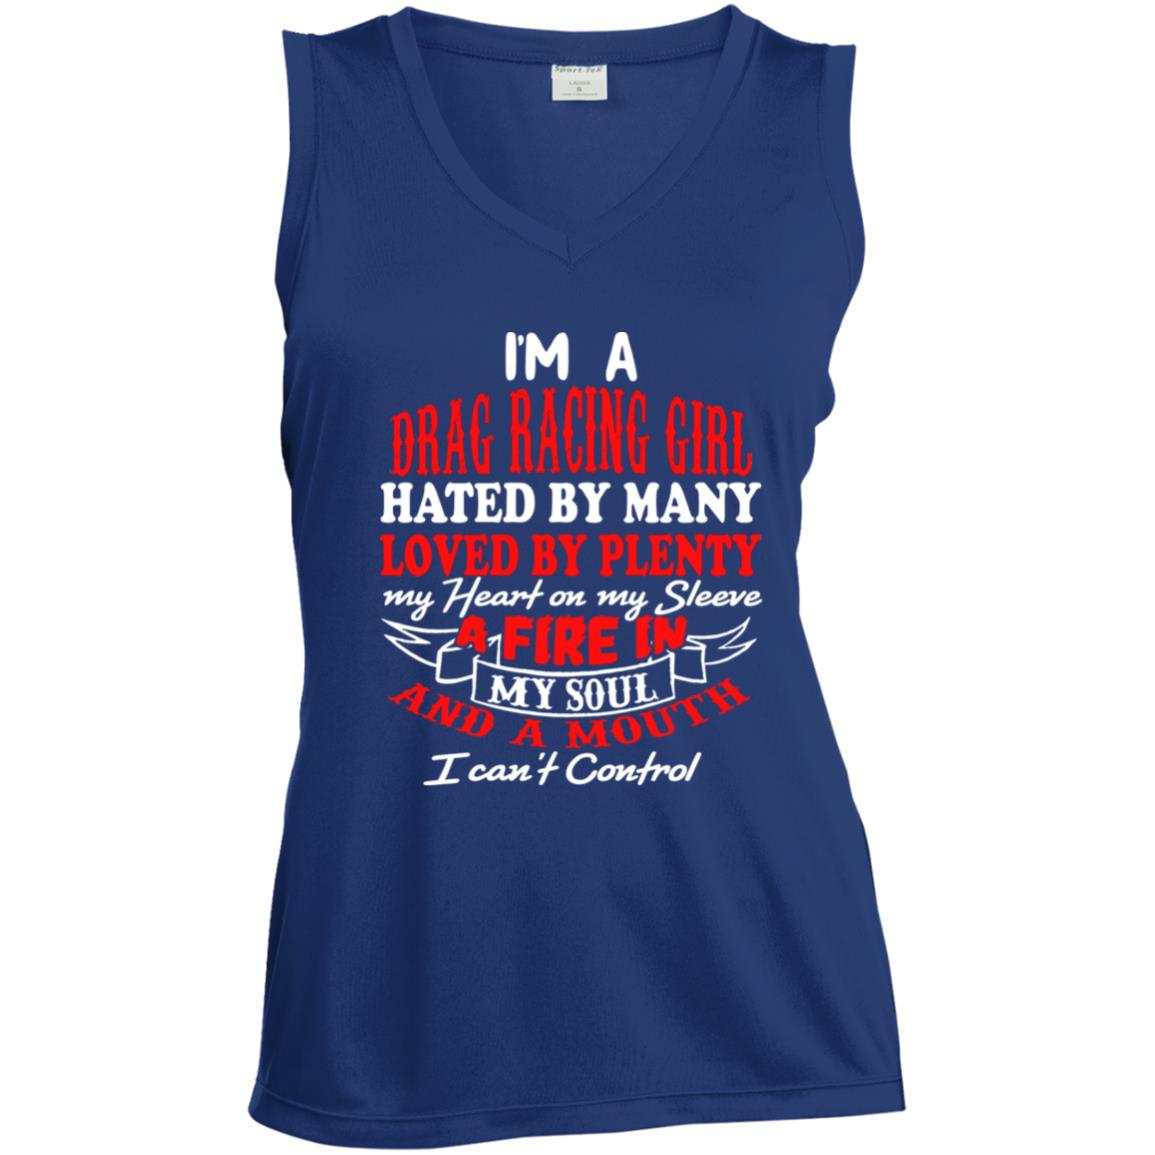 I'm A Drag Racing Girl Hated By Many Loved By Plenty Ladies' Sleeveless V-Neck Performance Tee